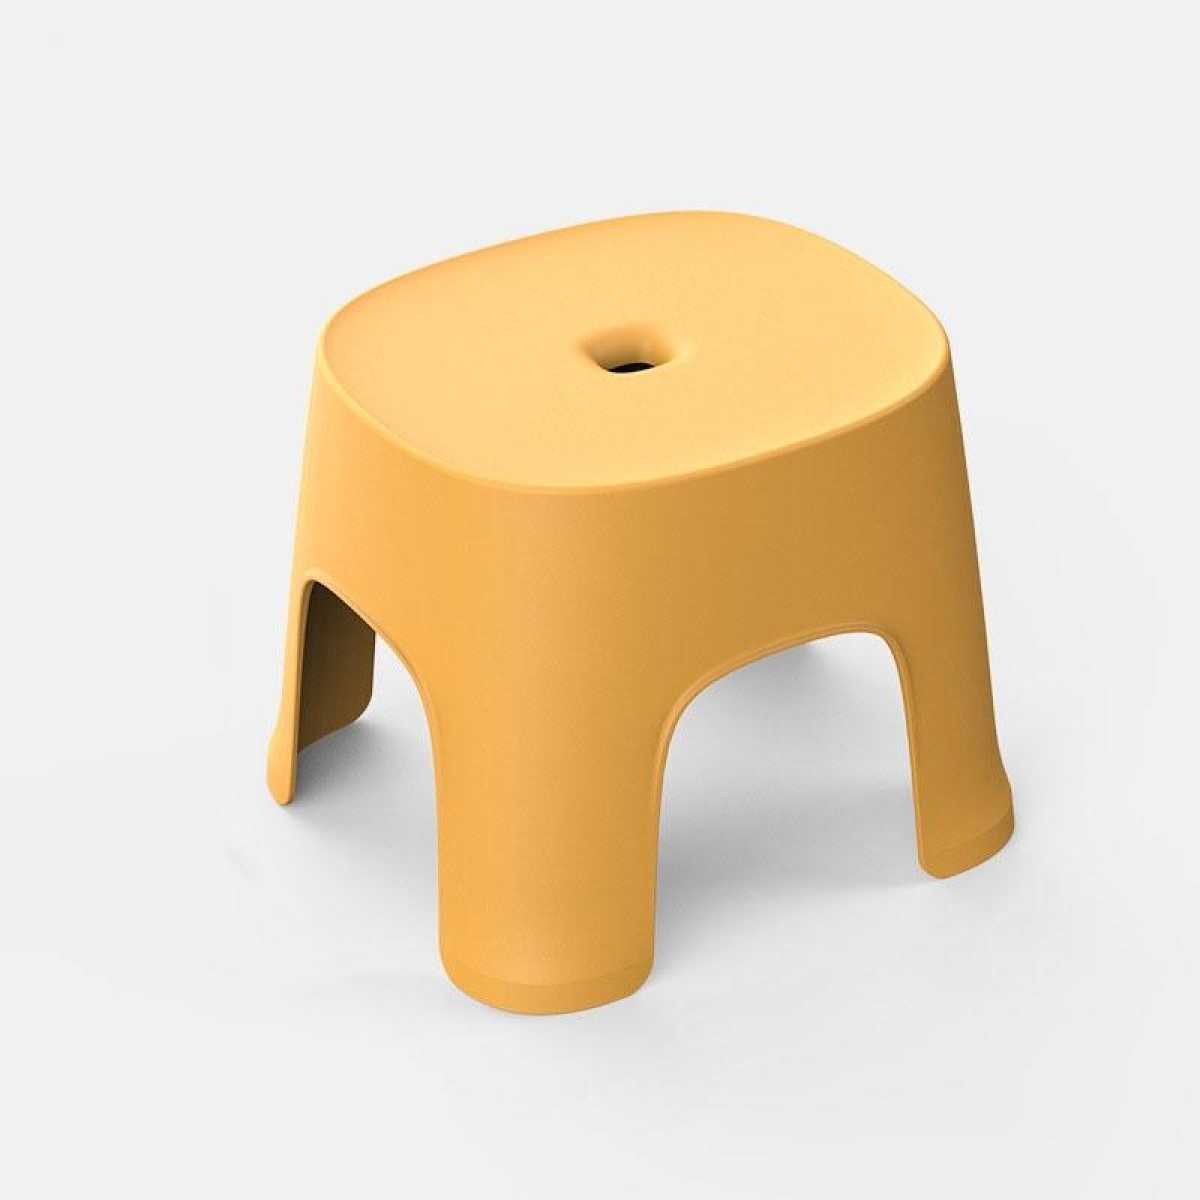 Household Bathroom Row Stools Plastic Stools Thickened Low Stools Square Stools Small Benches, Colour: Maple Yellow Adult